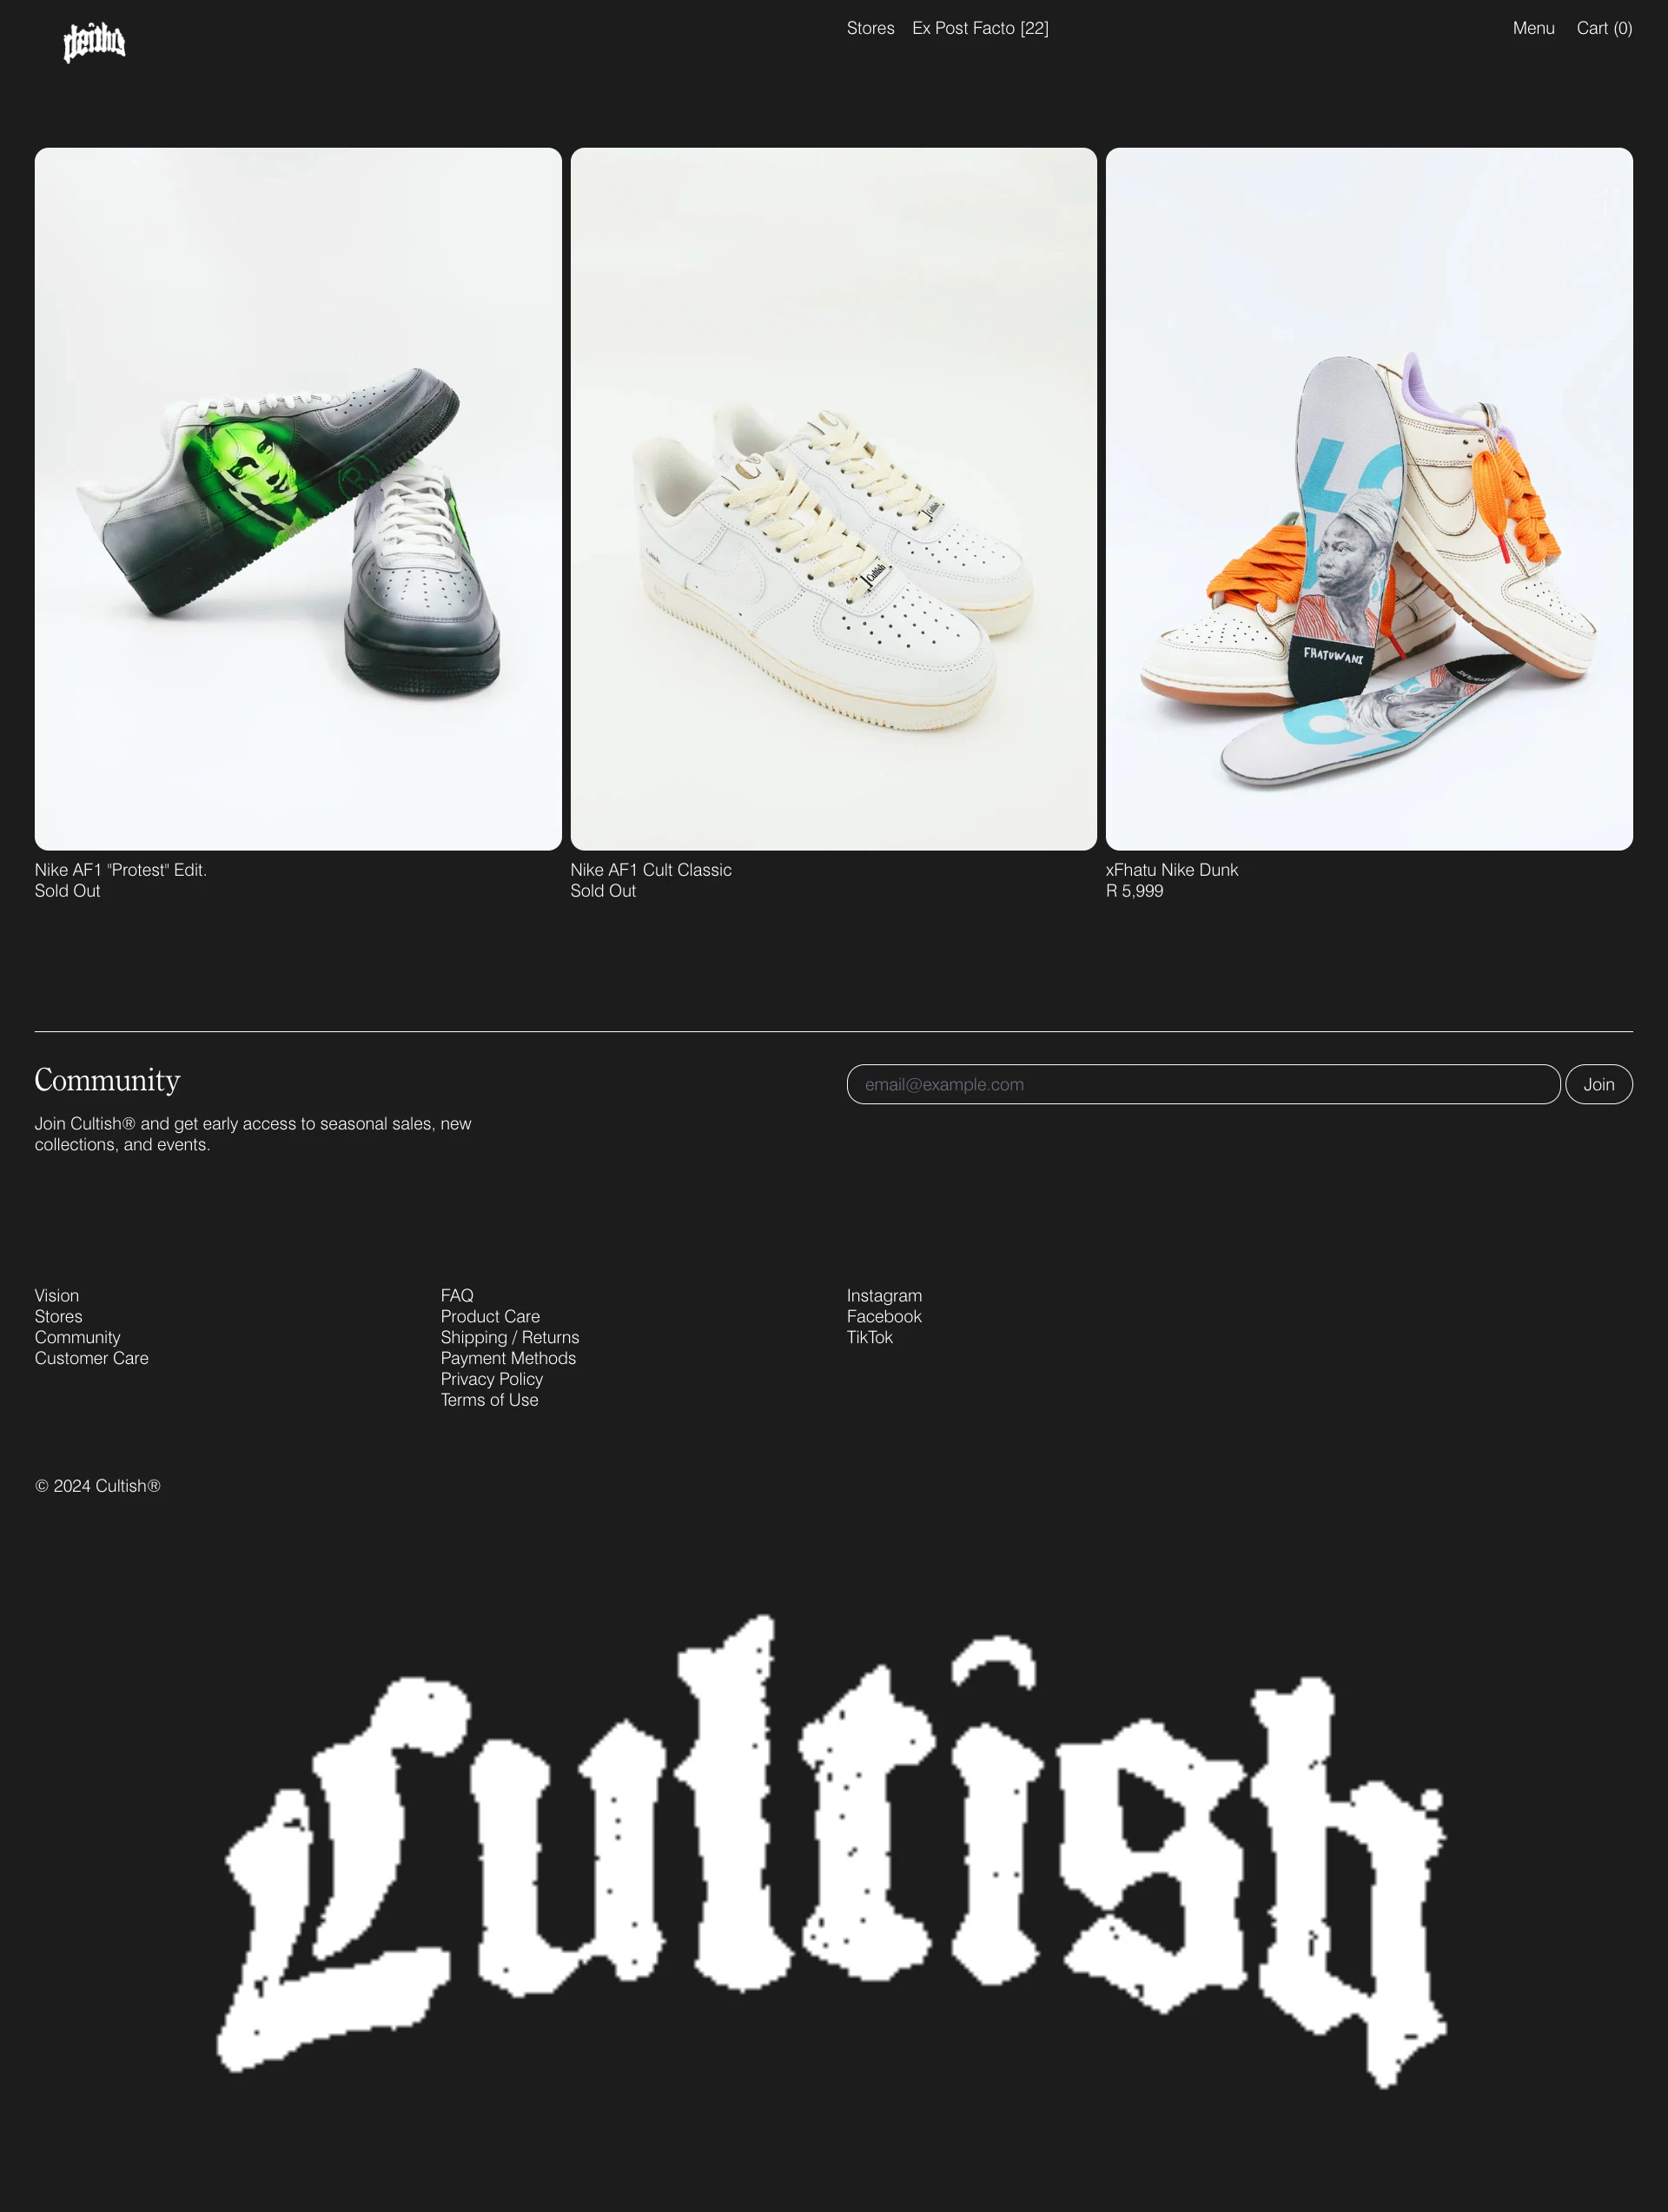 Cultish Landing Page Example: Cultish emerged in 2020, yet its soul is deeply rooted in the vivid ethos of the 1990s. Ryan Brussow, shaped and inspired by the era of skateboarding, punk rock, and hip-hop, brings this vibrant spirit into the present. The streets he once roamed during his youth infuse his vision, guiding the creation of Cultish. While the brand itself is a product of the new decade, its foundation is built on the countercultural movements that defined Ryan's formative years. Not just a fashion label, Cultish is a bridge connecting the rebellious energy of the past to the modern era. Each design reflects this connection, blending opinion and fearless design with oversized, drapey forms, echoing the streets that once were Ryan's playground.